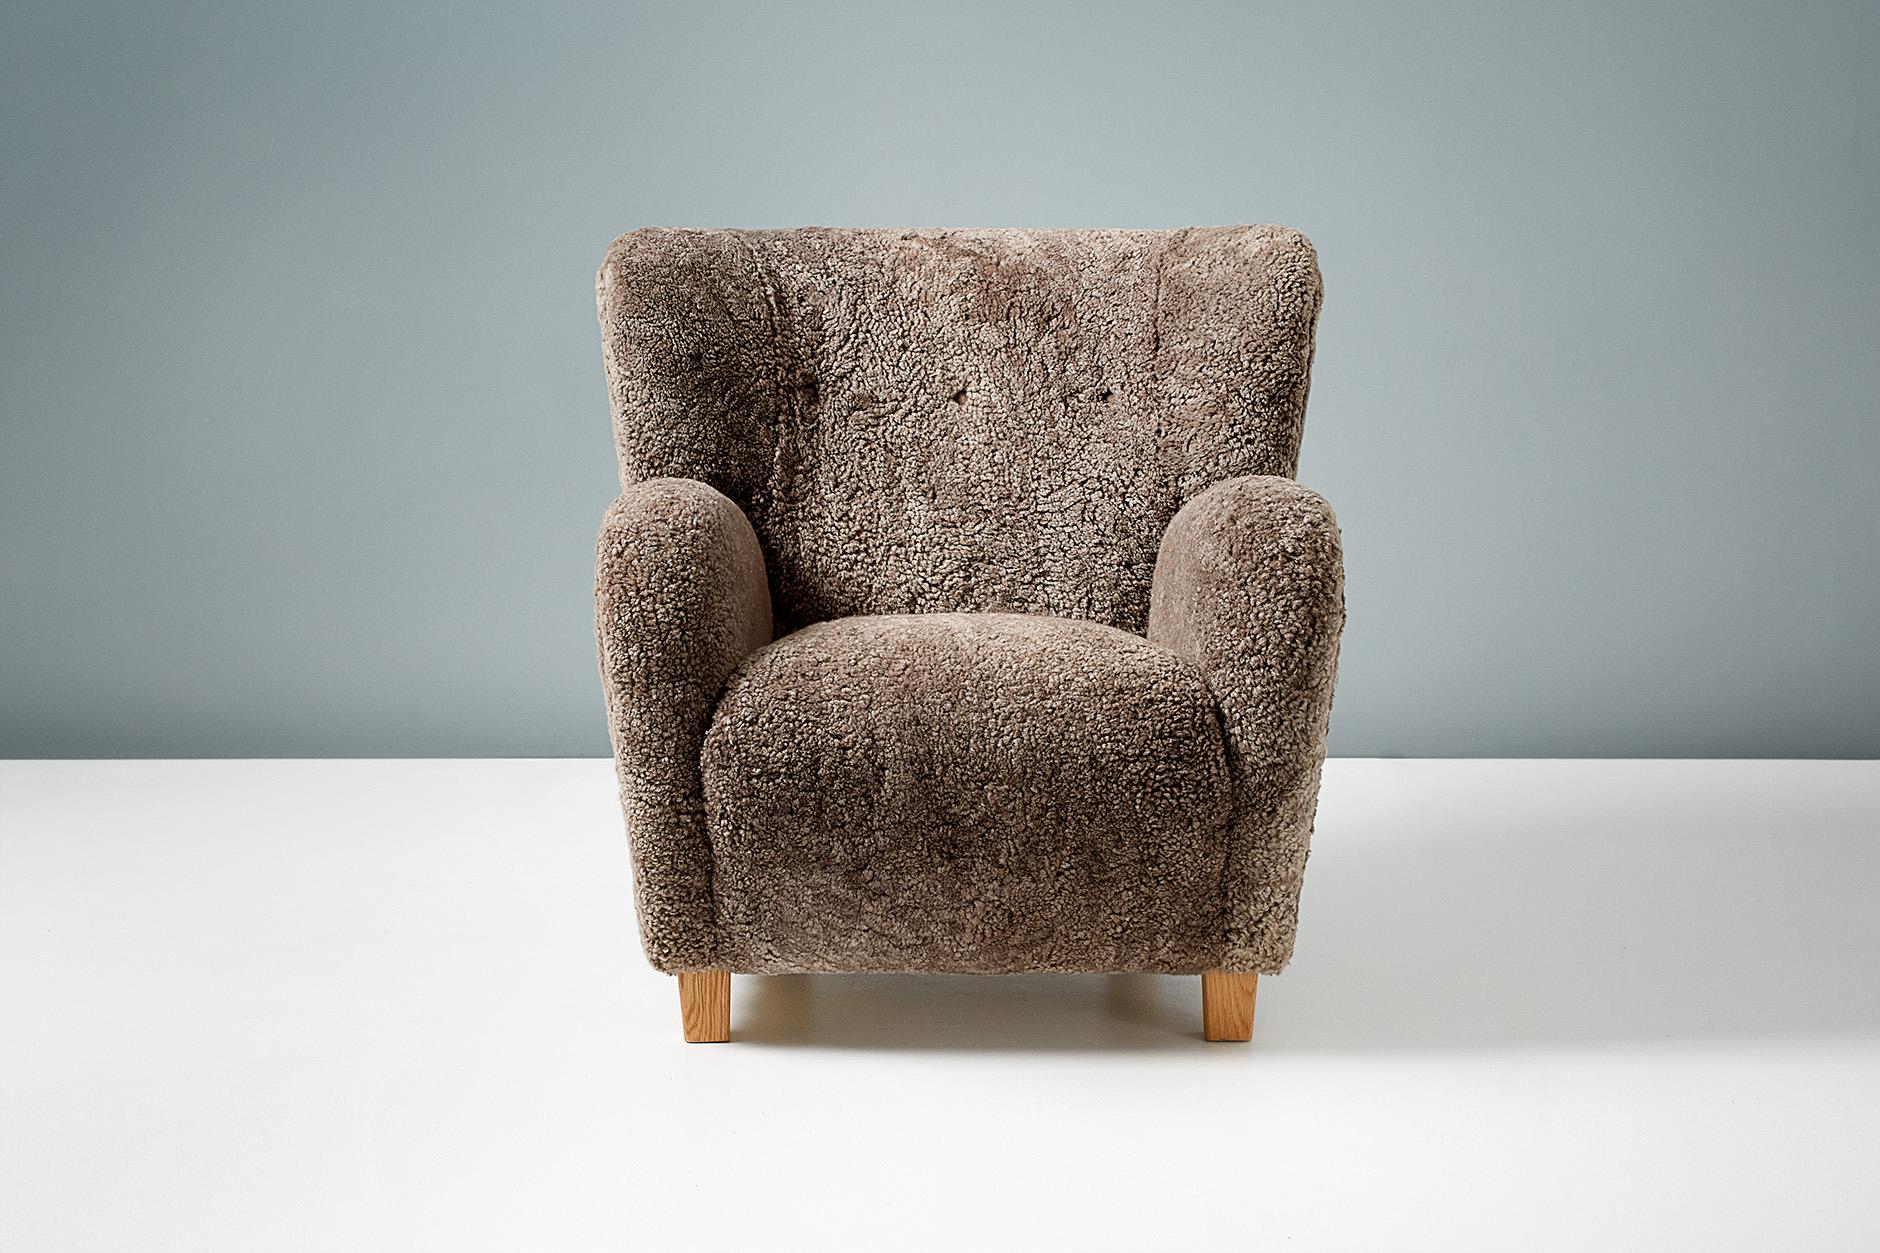 Dagmar Design

KARU lounge chair & ottoman

A custom made lounge chair and ottoman developed and produced at our workshops in London using the highest quality materials. This example is upholstered in ‘Sahara’ brown Australian shearling and